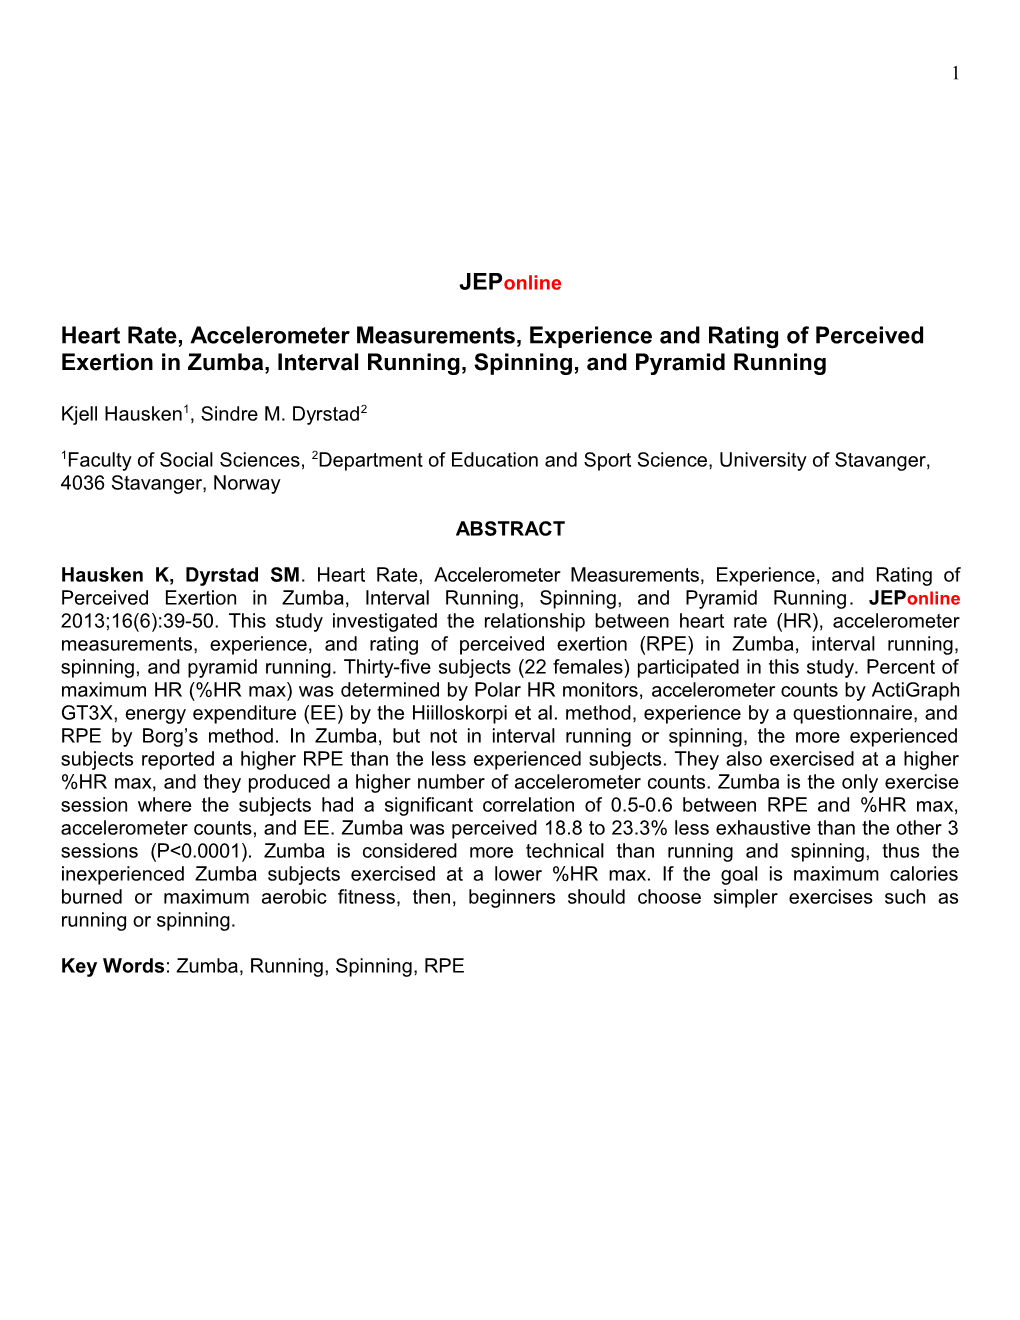 Heart Rate, Accelerometer Measurements, Experience and Rating Ofperceived Exertion In